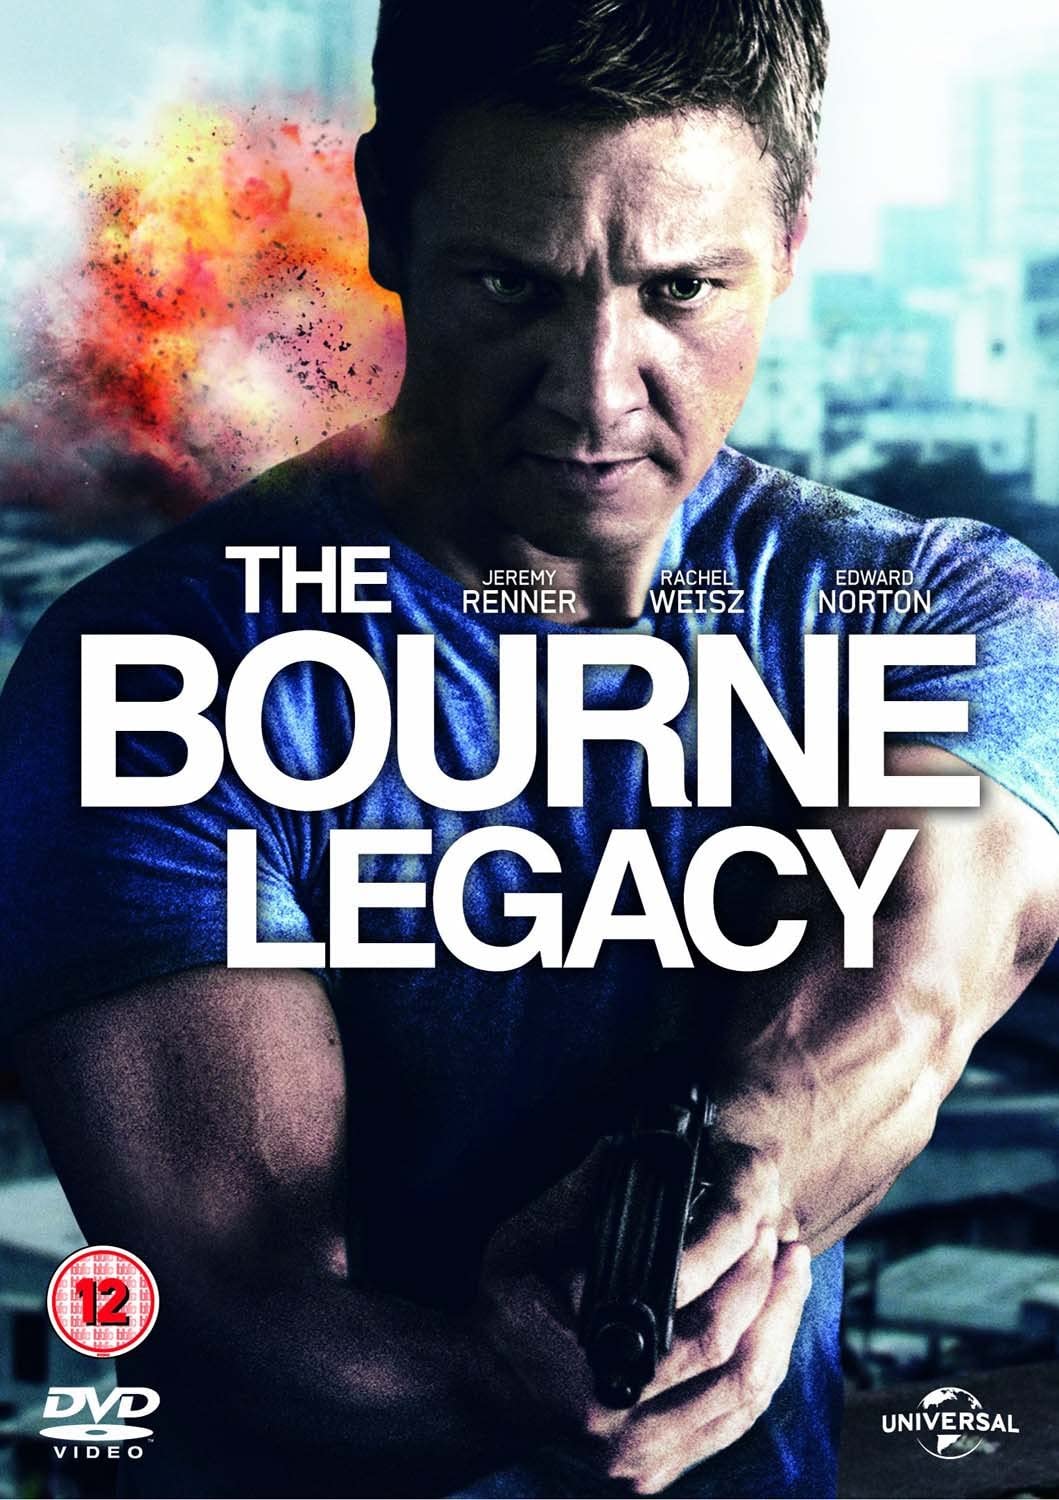 Jeremy Renner as Aaron Cross, in the Bourne Legacy